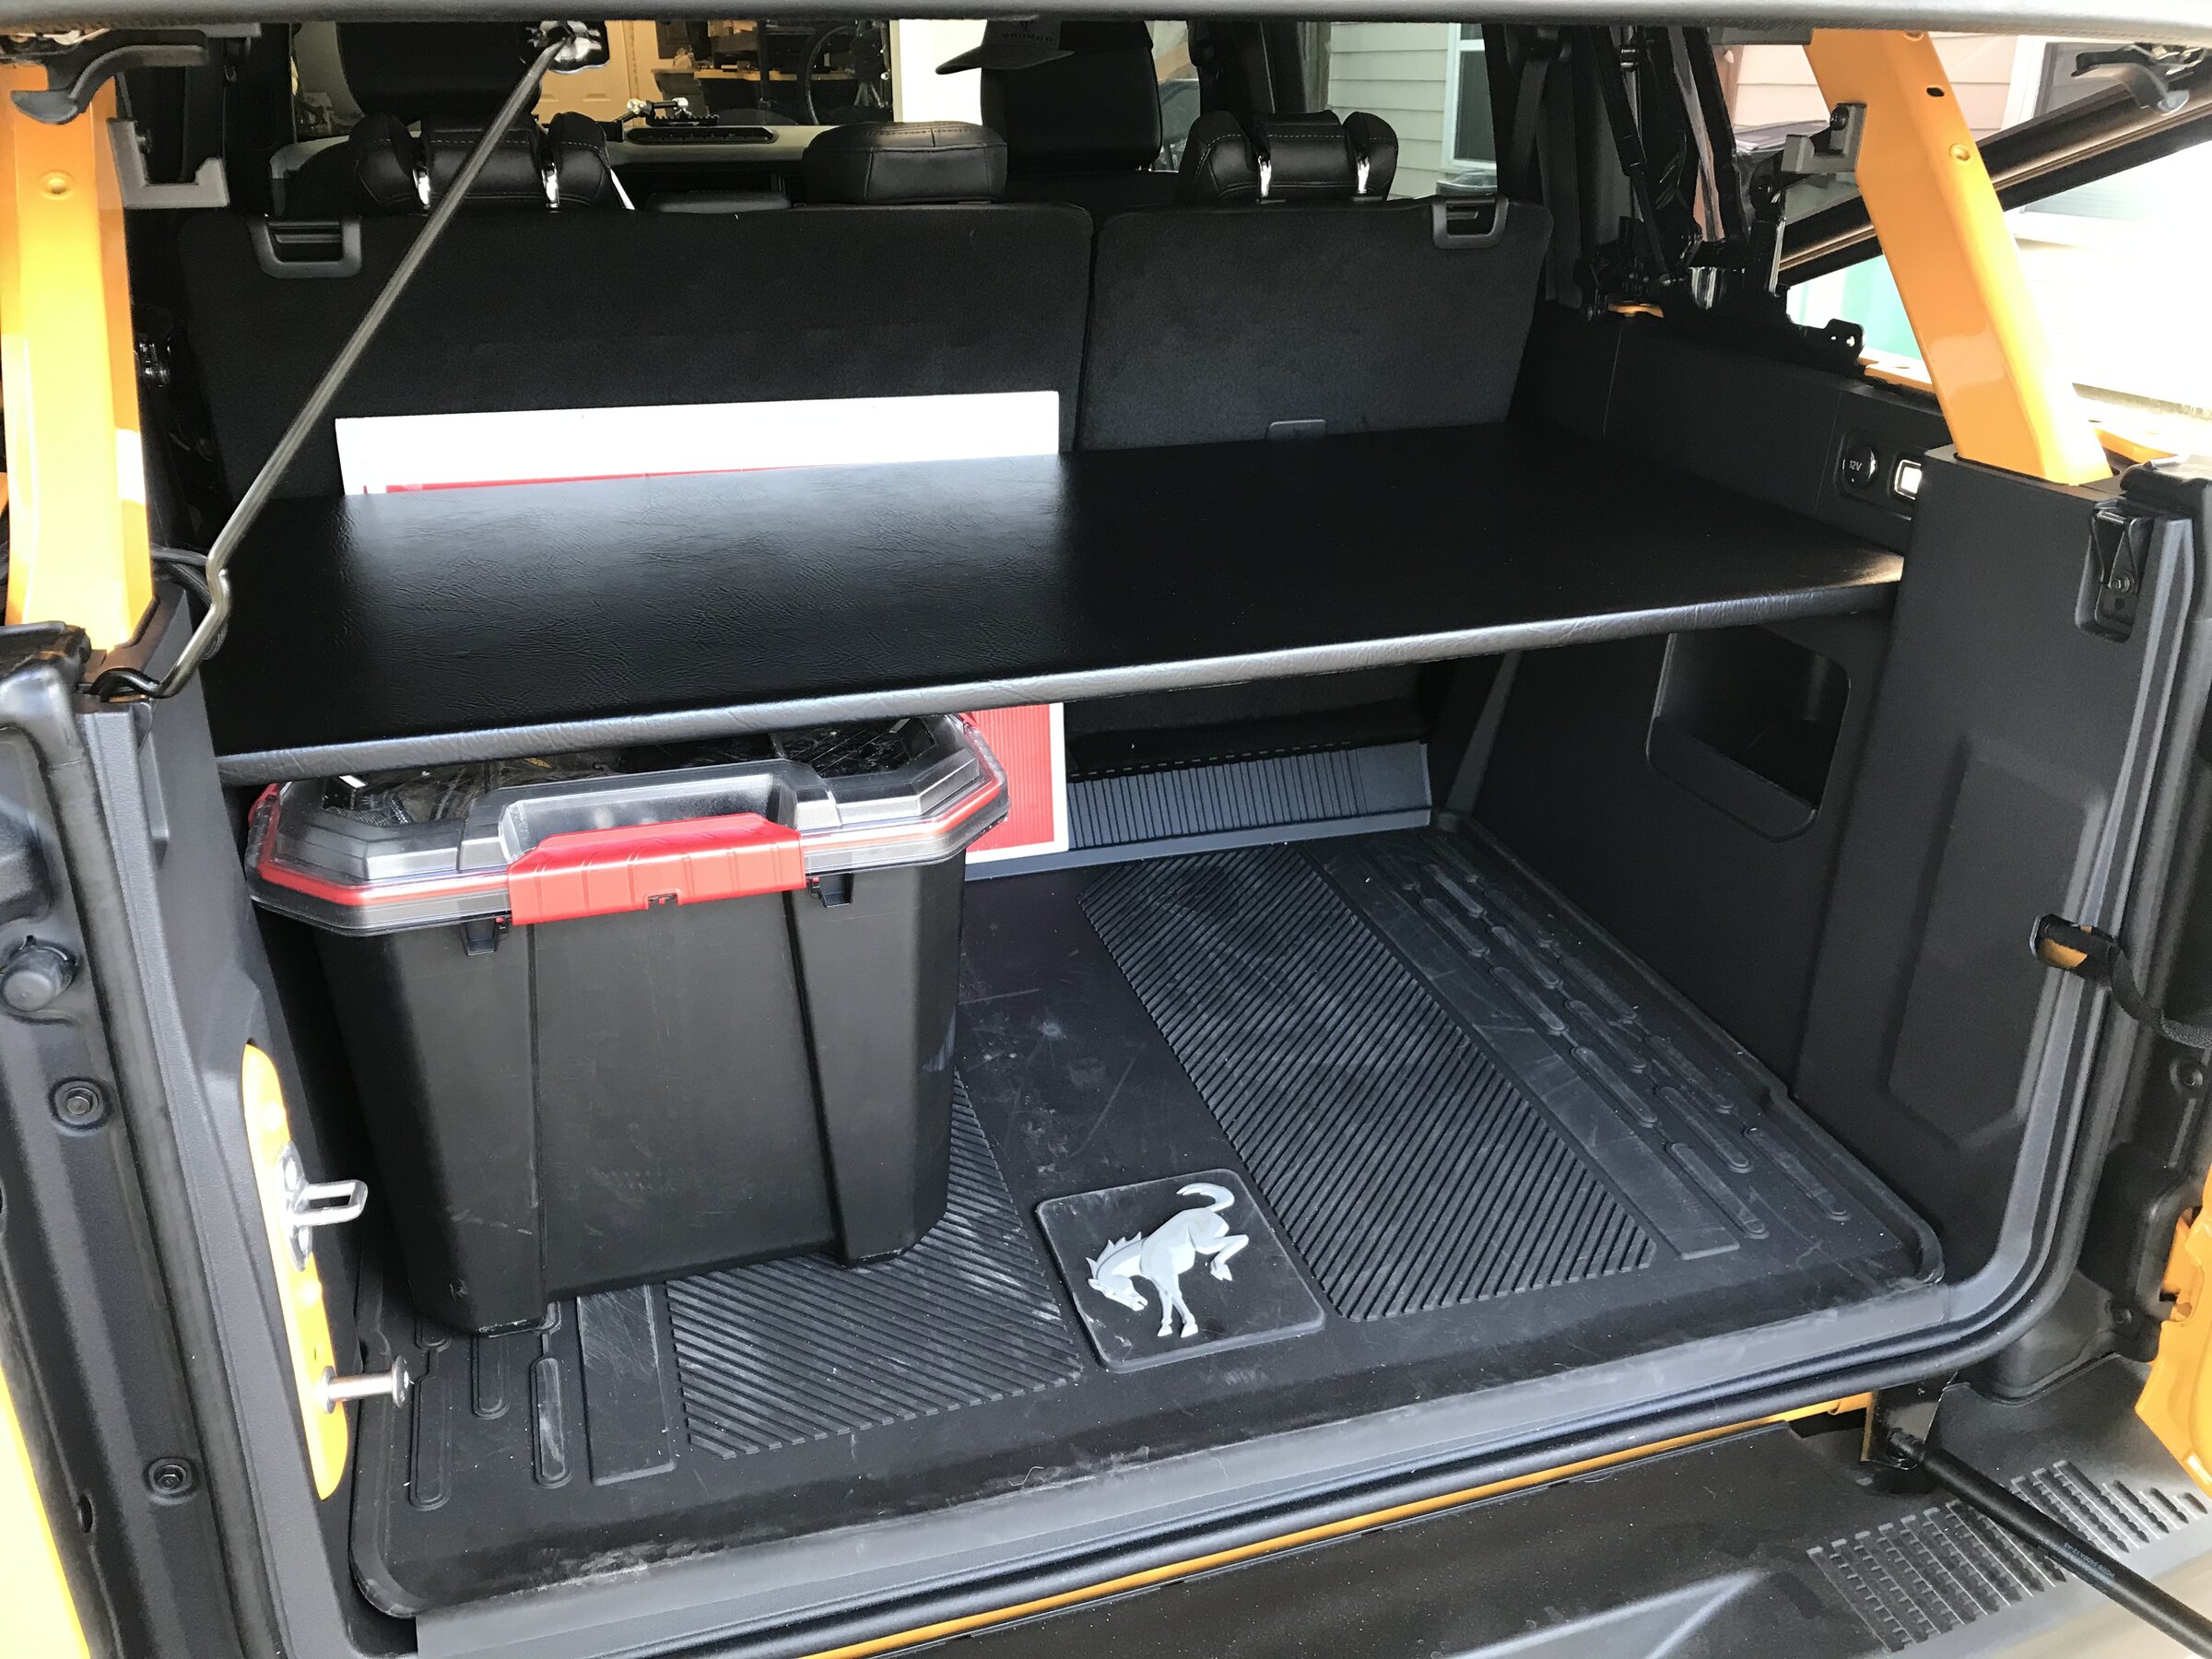 Ford Bronco [DIY] $28 trunk storage shelf for 4 door Broncos. No cutting required. CDC7BA42-4800-4DEE-BC39-02FF51FDE67D